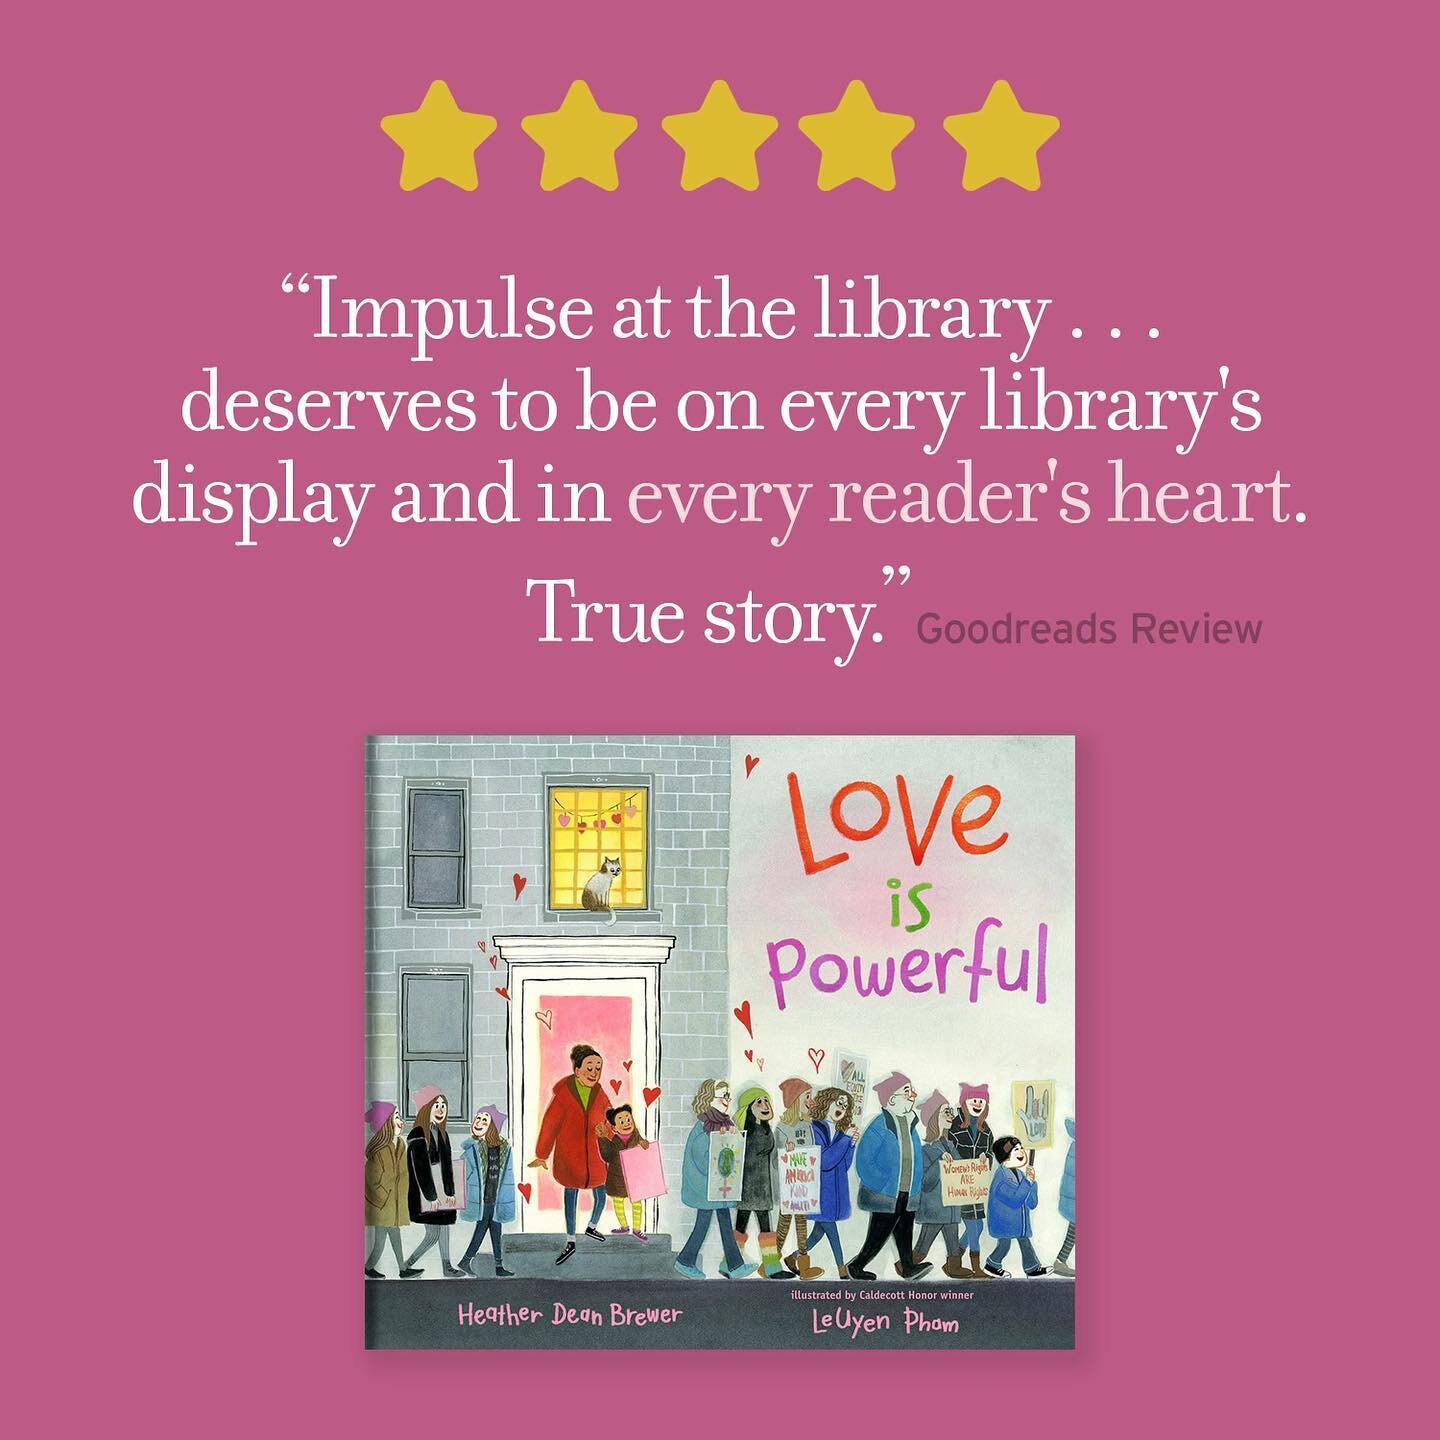 This review from Cheryl made my week 💕 thanks for reading.
.
.
.
#bookstagram #bookreview #loveispowerful #kidlit #picturebook #allyship #kidactivist